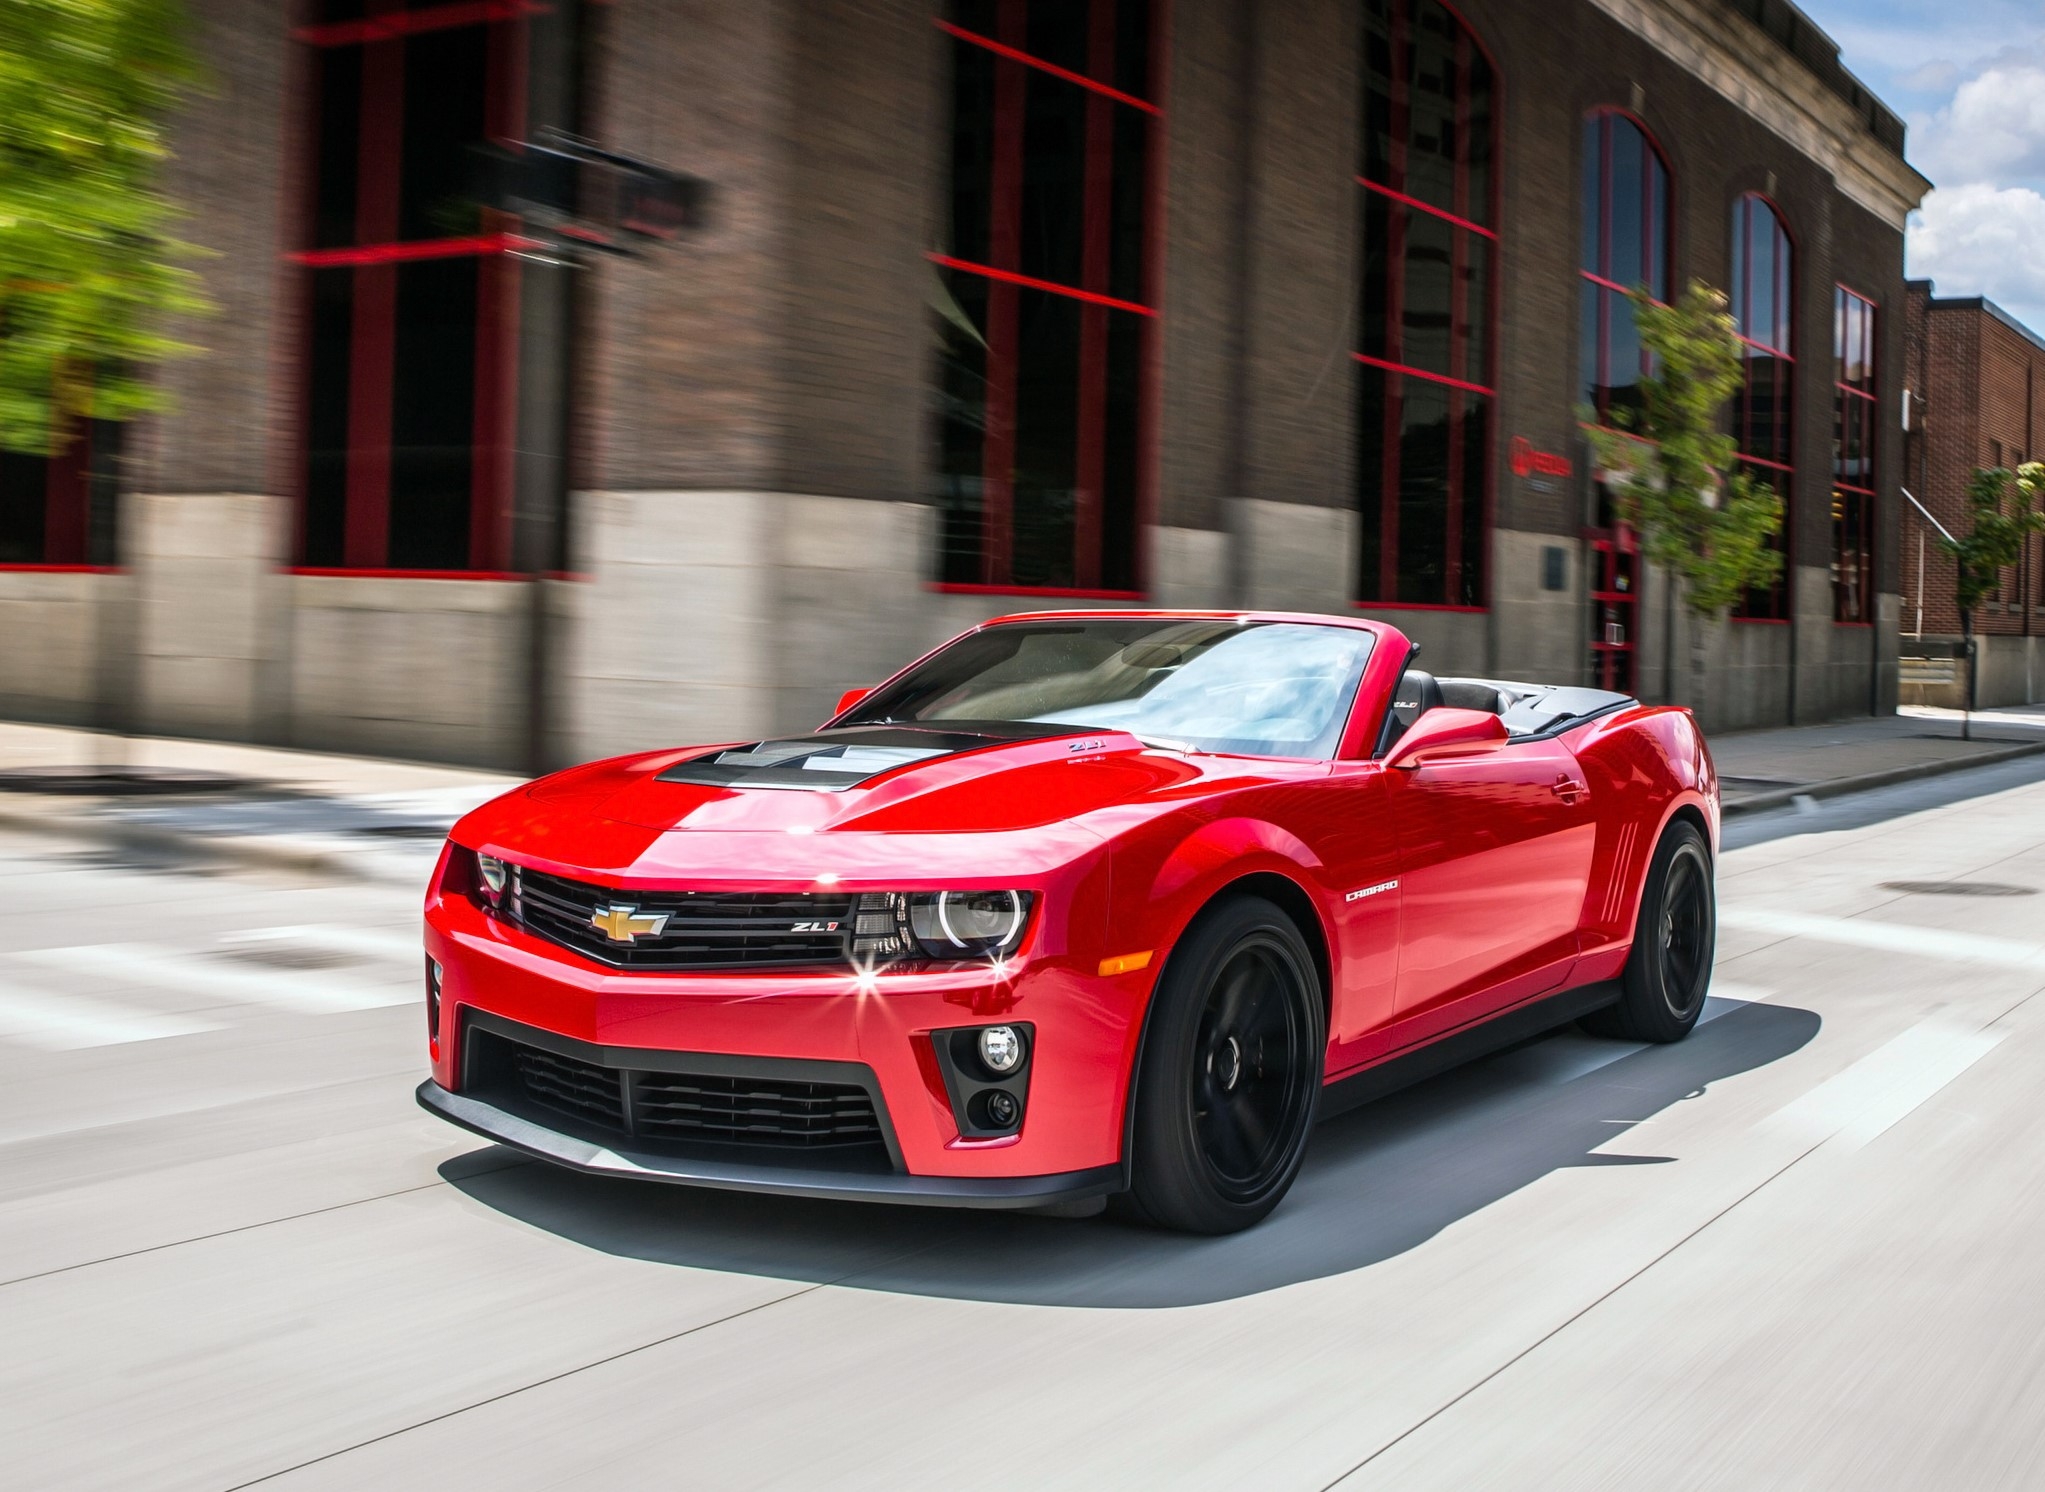 Wallpapers wallpaper chevrolet camaro zl1 in move convertible muscle cars on the desktop